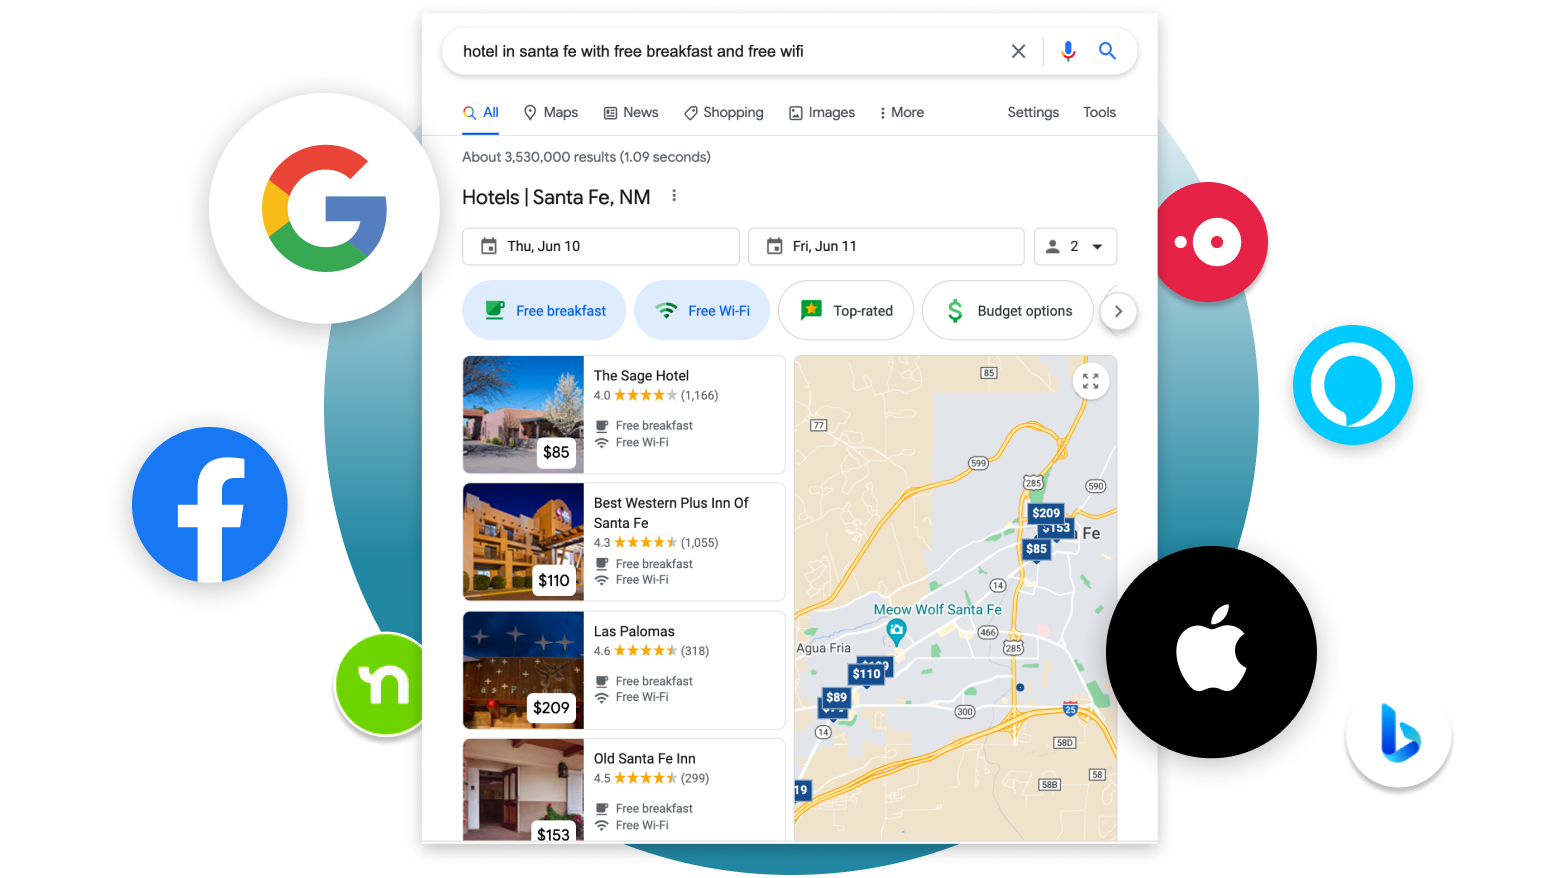 The Google search UI for a query that reads "hotel in santa fe with free breakfast and free wifi" and the search engine results page with all relevant business listings results and their aggregate reviews. Also shows publisher logos for Google Business Profile Listings, Facebook listings, Apple Business Connect, Bing, Alexa, Nextdoor, and Doordash.